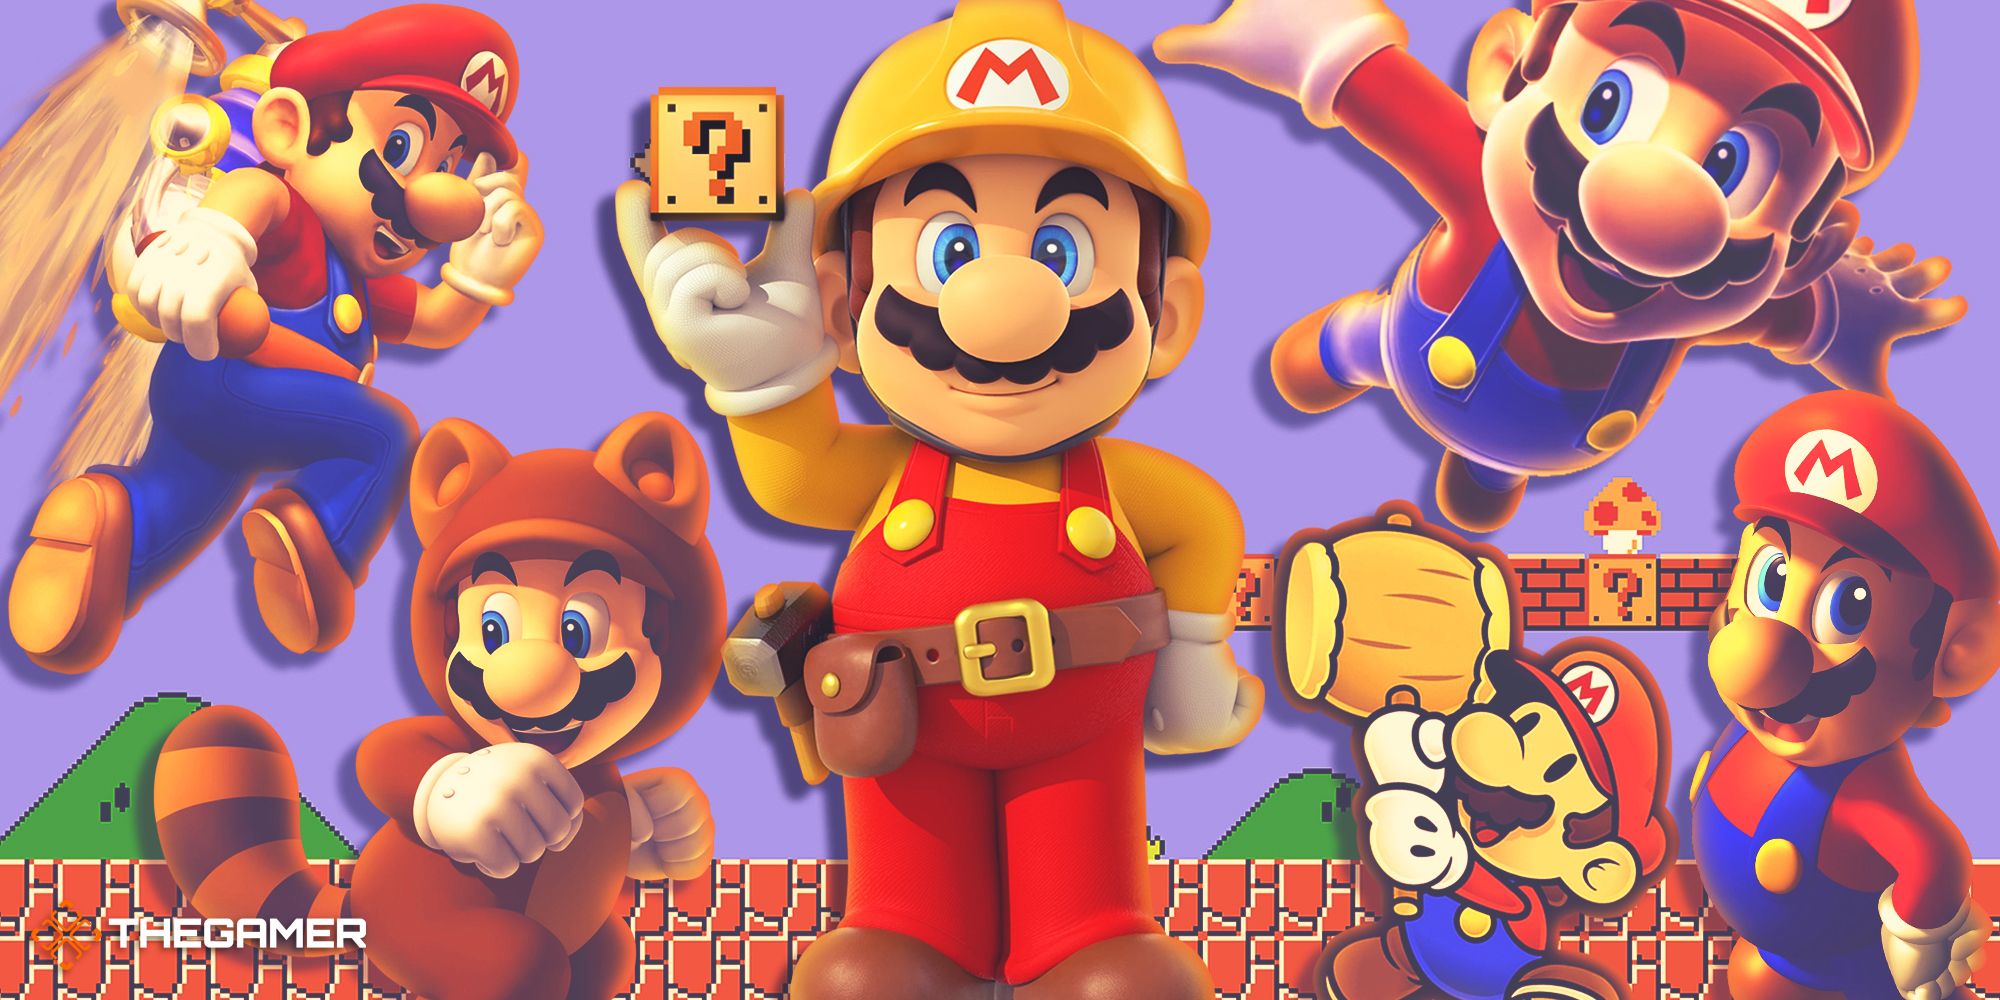 15 Hardest SNES Games of All-Time